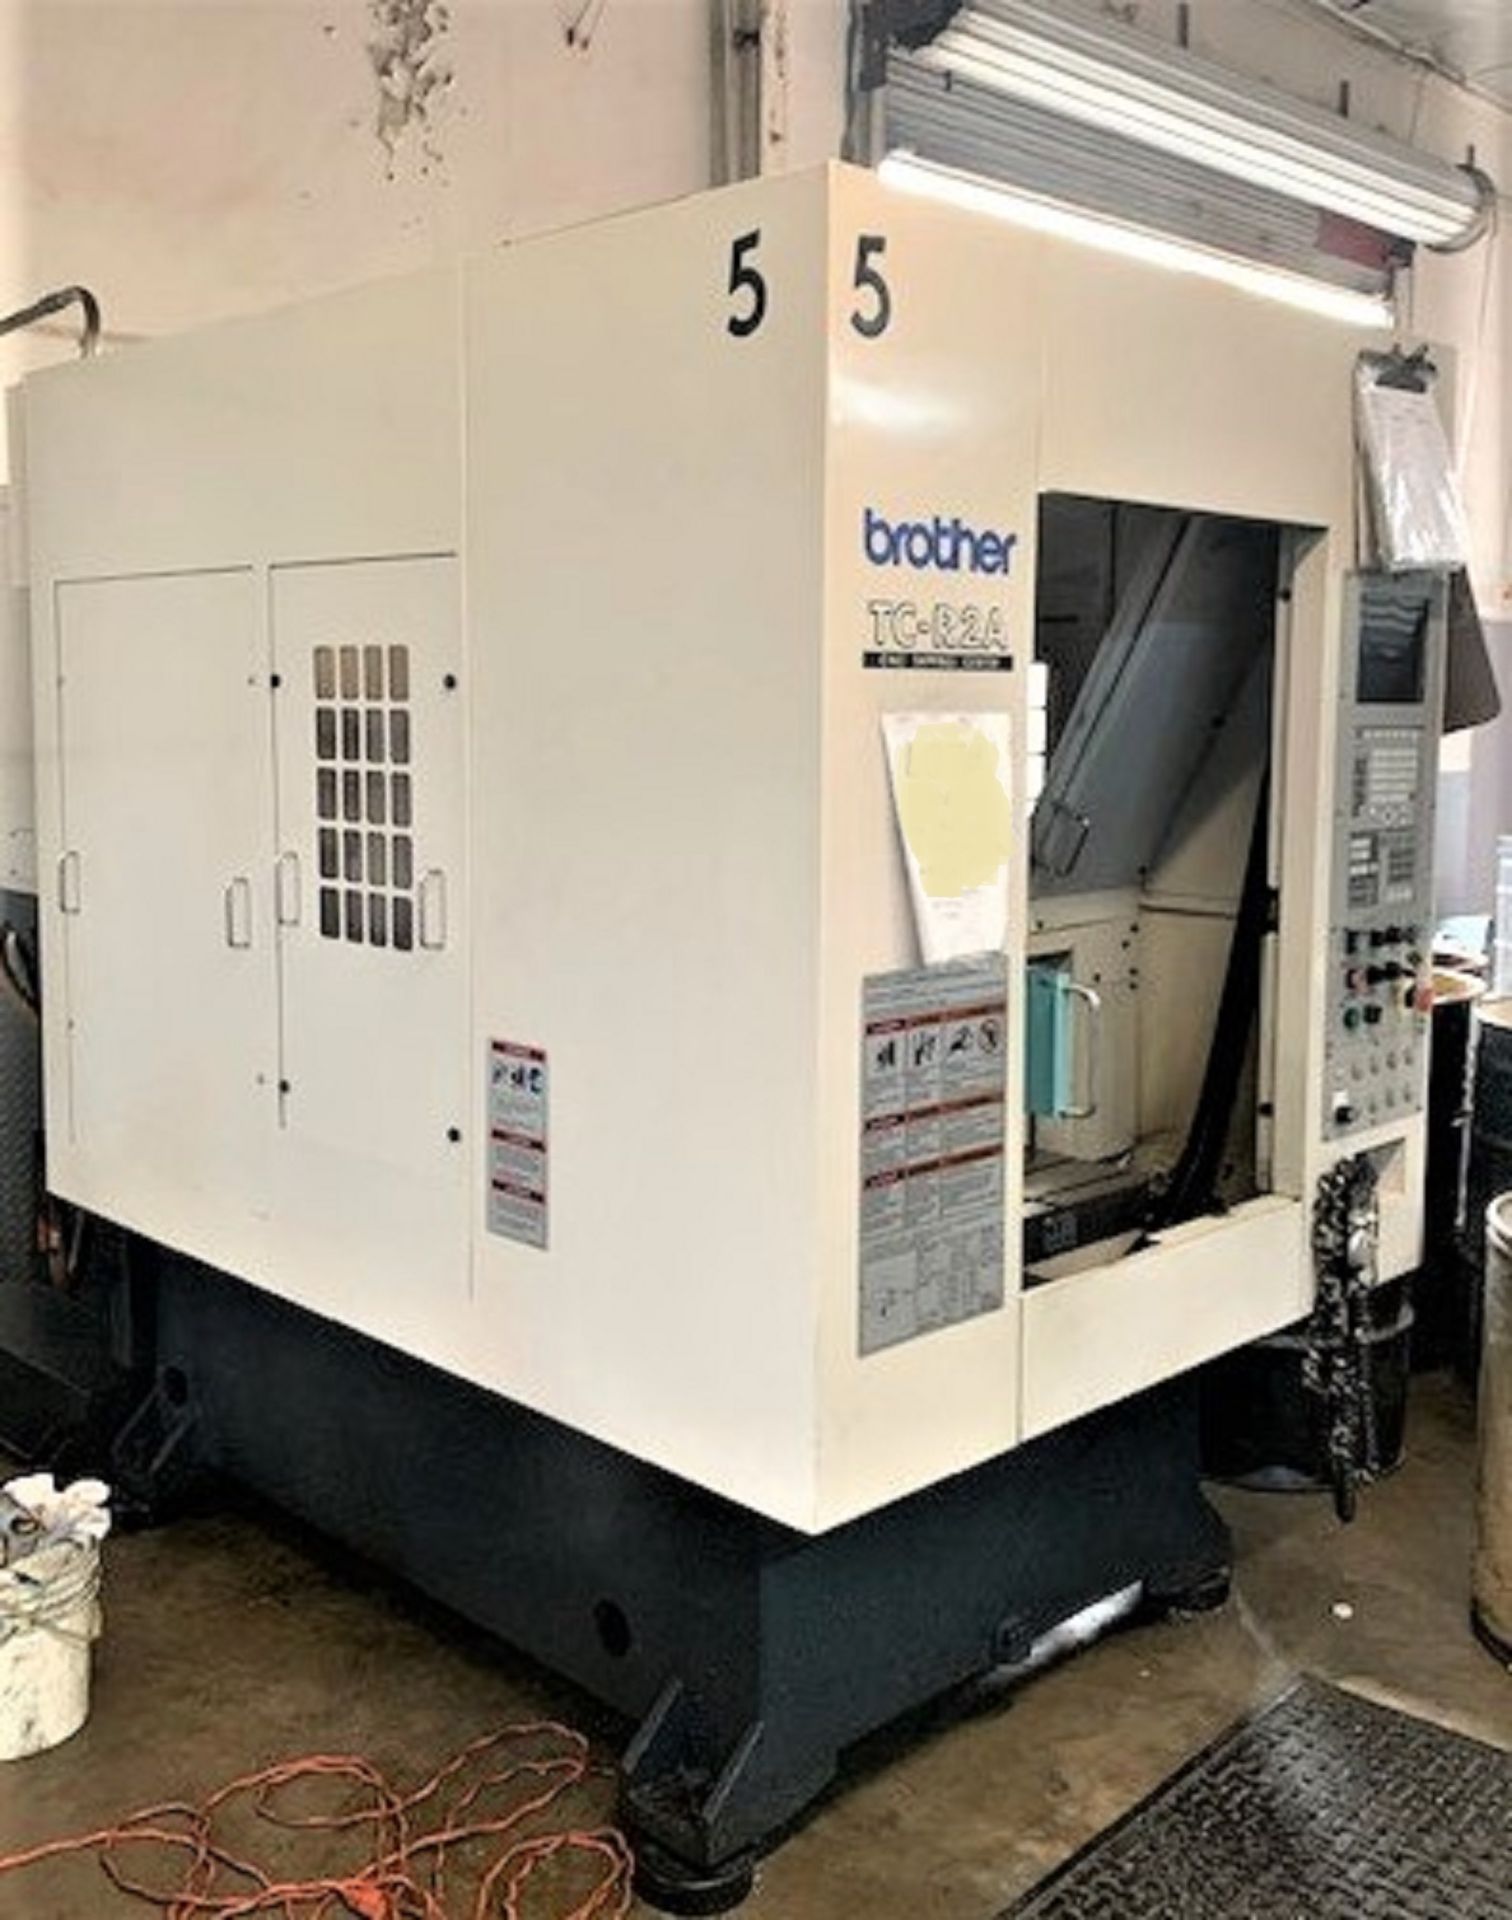 Brother TC-R2A CNC Drill/Tap Vertical Machining Center W/pallet Changer, S/N 111858, New 2006 - Image 8 of 9